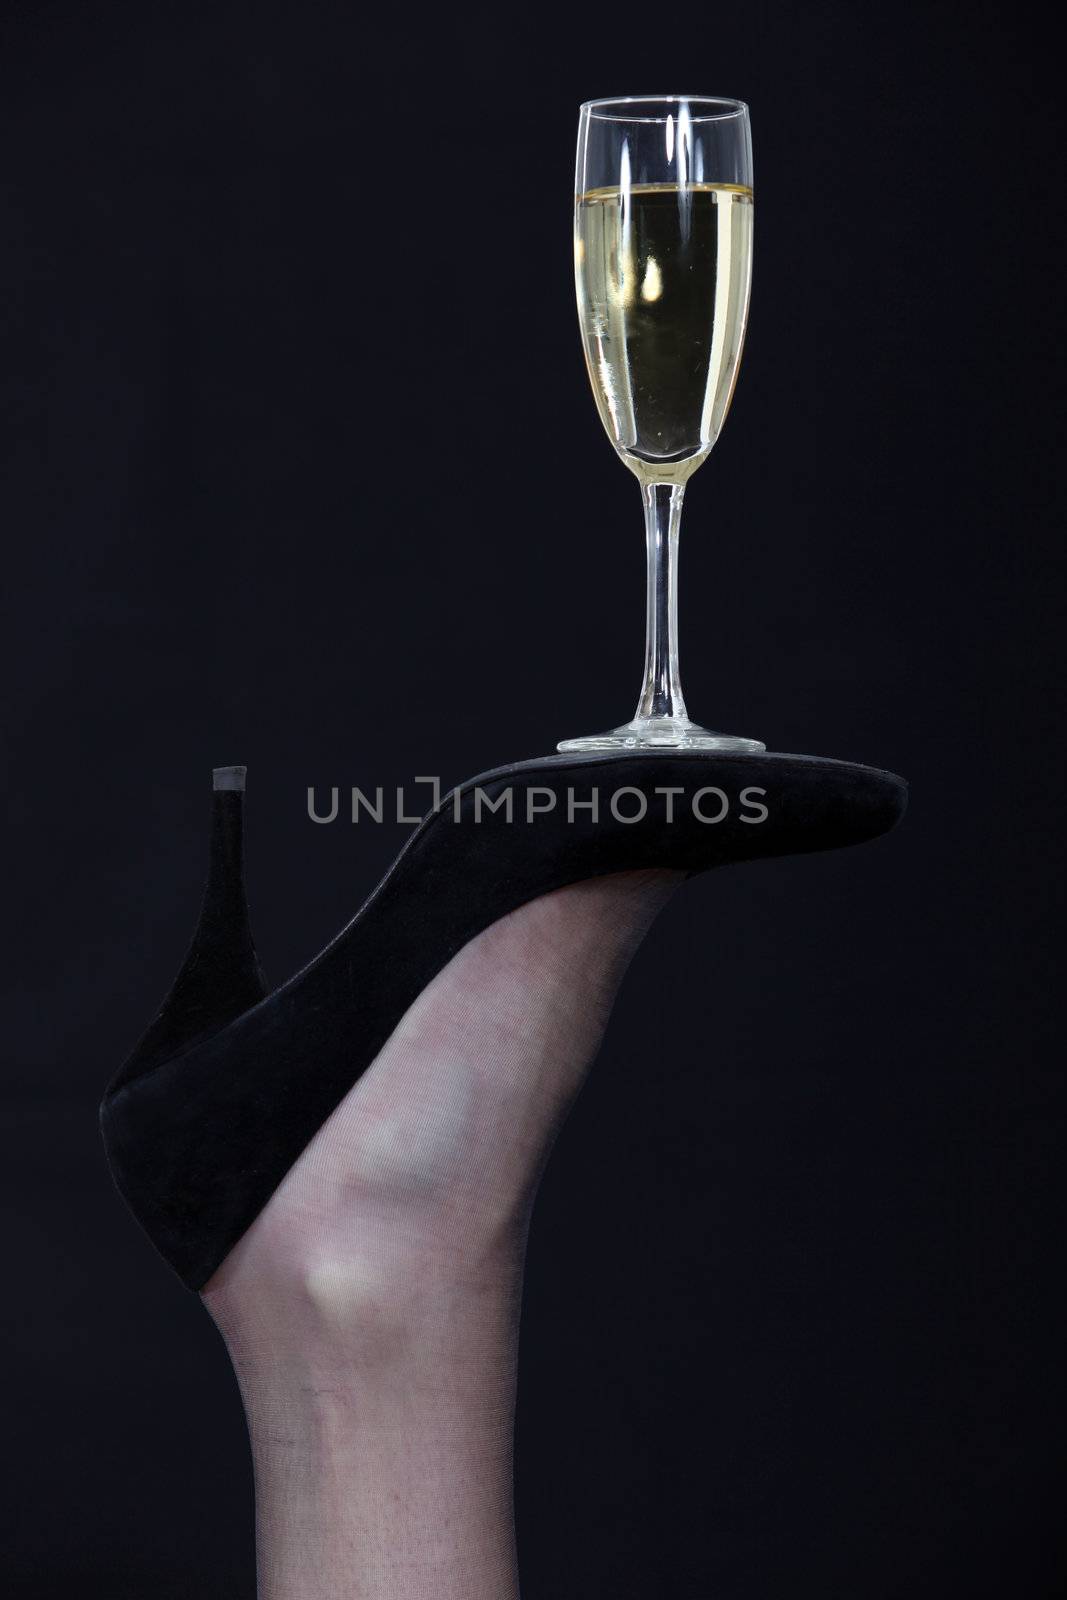 A champagne glass balanced on the sole of a shoe by phovoir